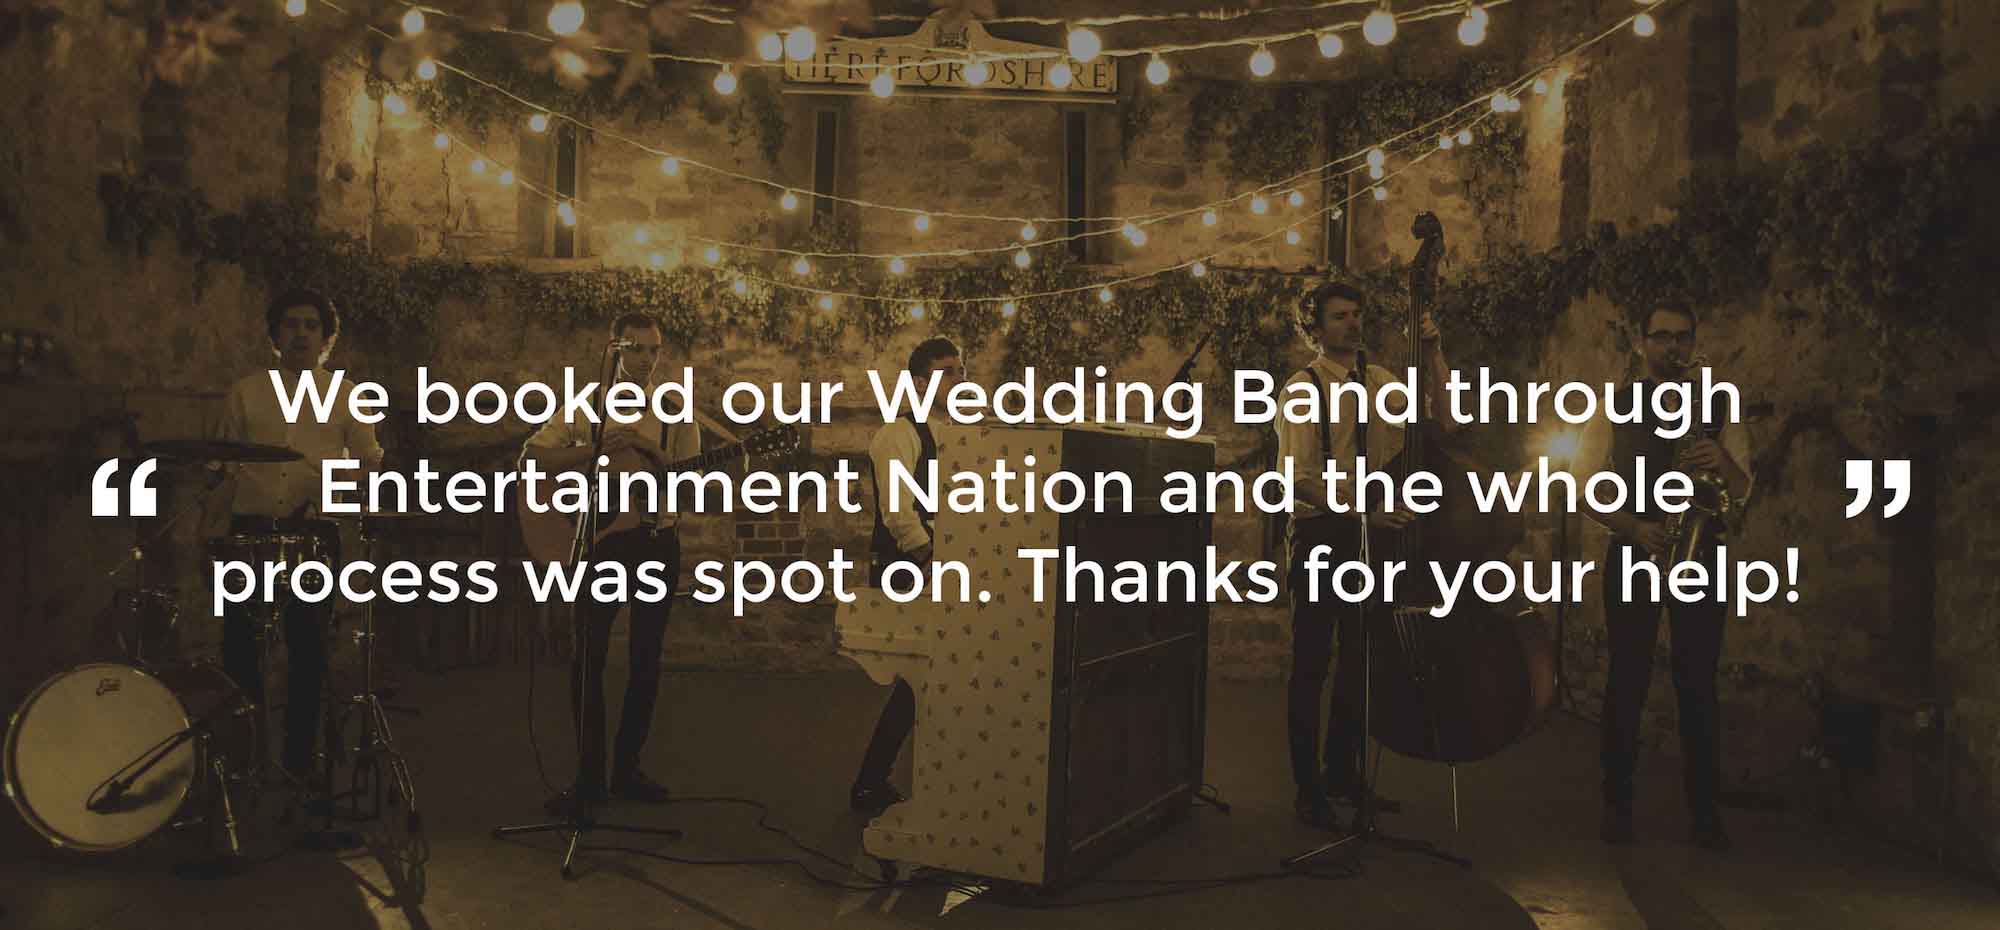 Client Review of a Wedding Band Cleveland